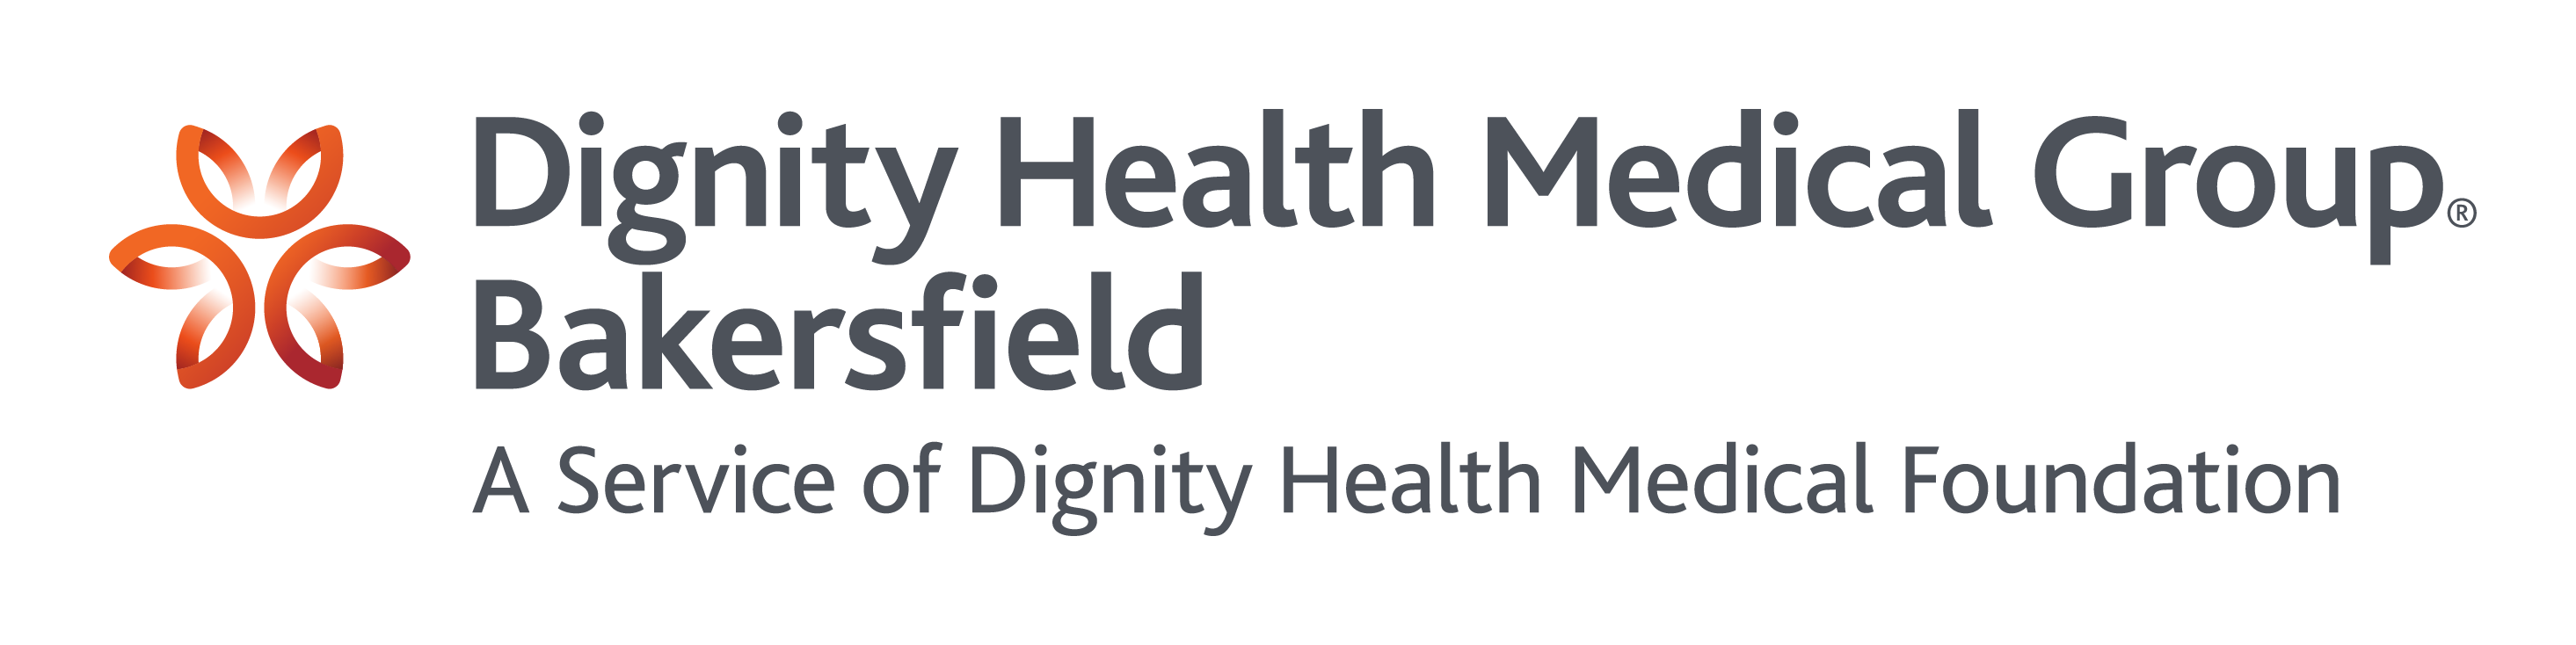 Cardiothoracic Surgery Physician - Dignity Health Medical Group - Bakersfield - Bakersfield